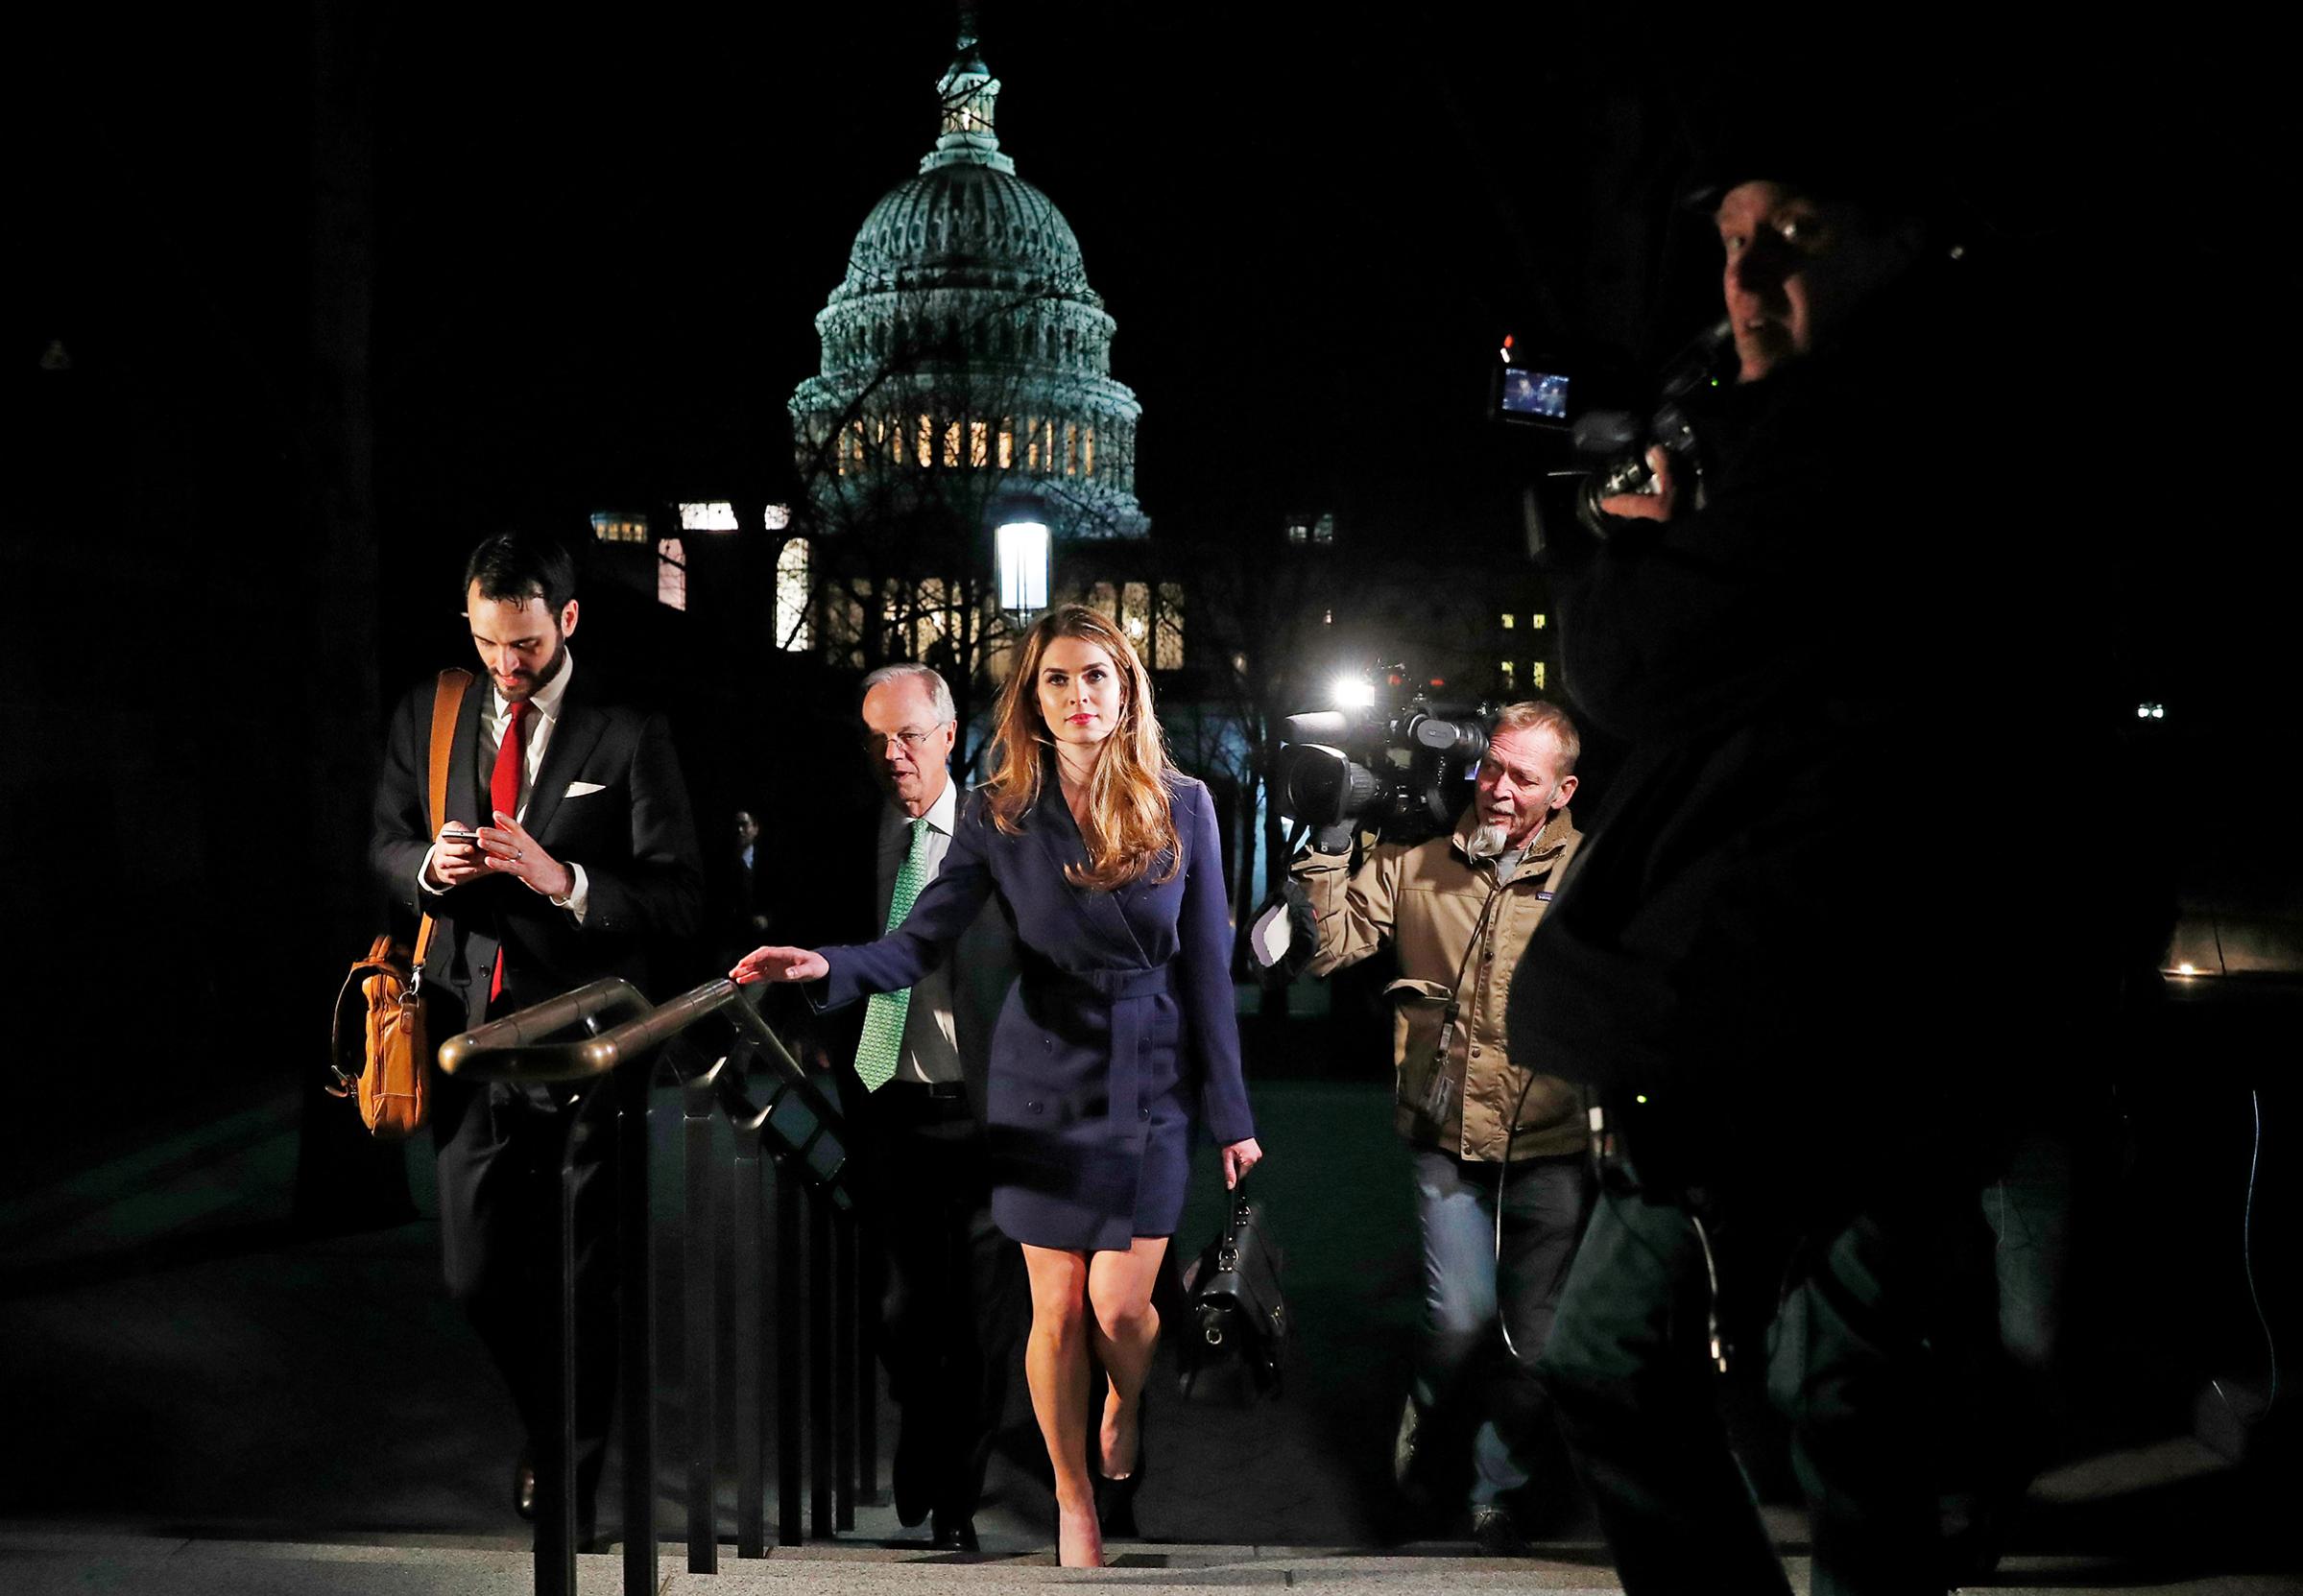 White House Communications Director Hope Hicks leaves after attending the House Intelligence Committee closed door meeting in Washington on Feb. 27, 2018.